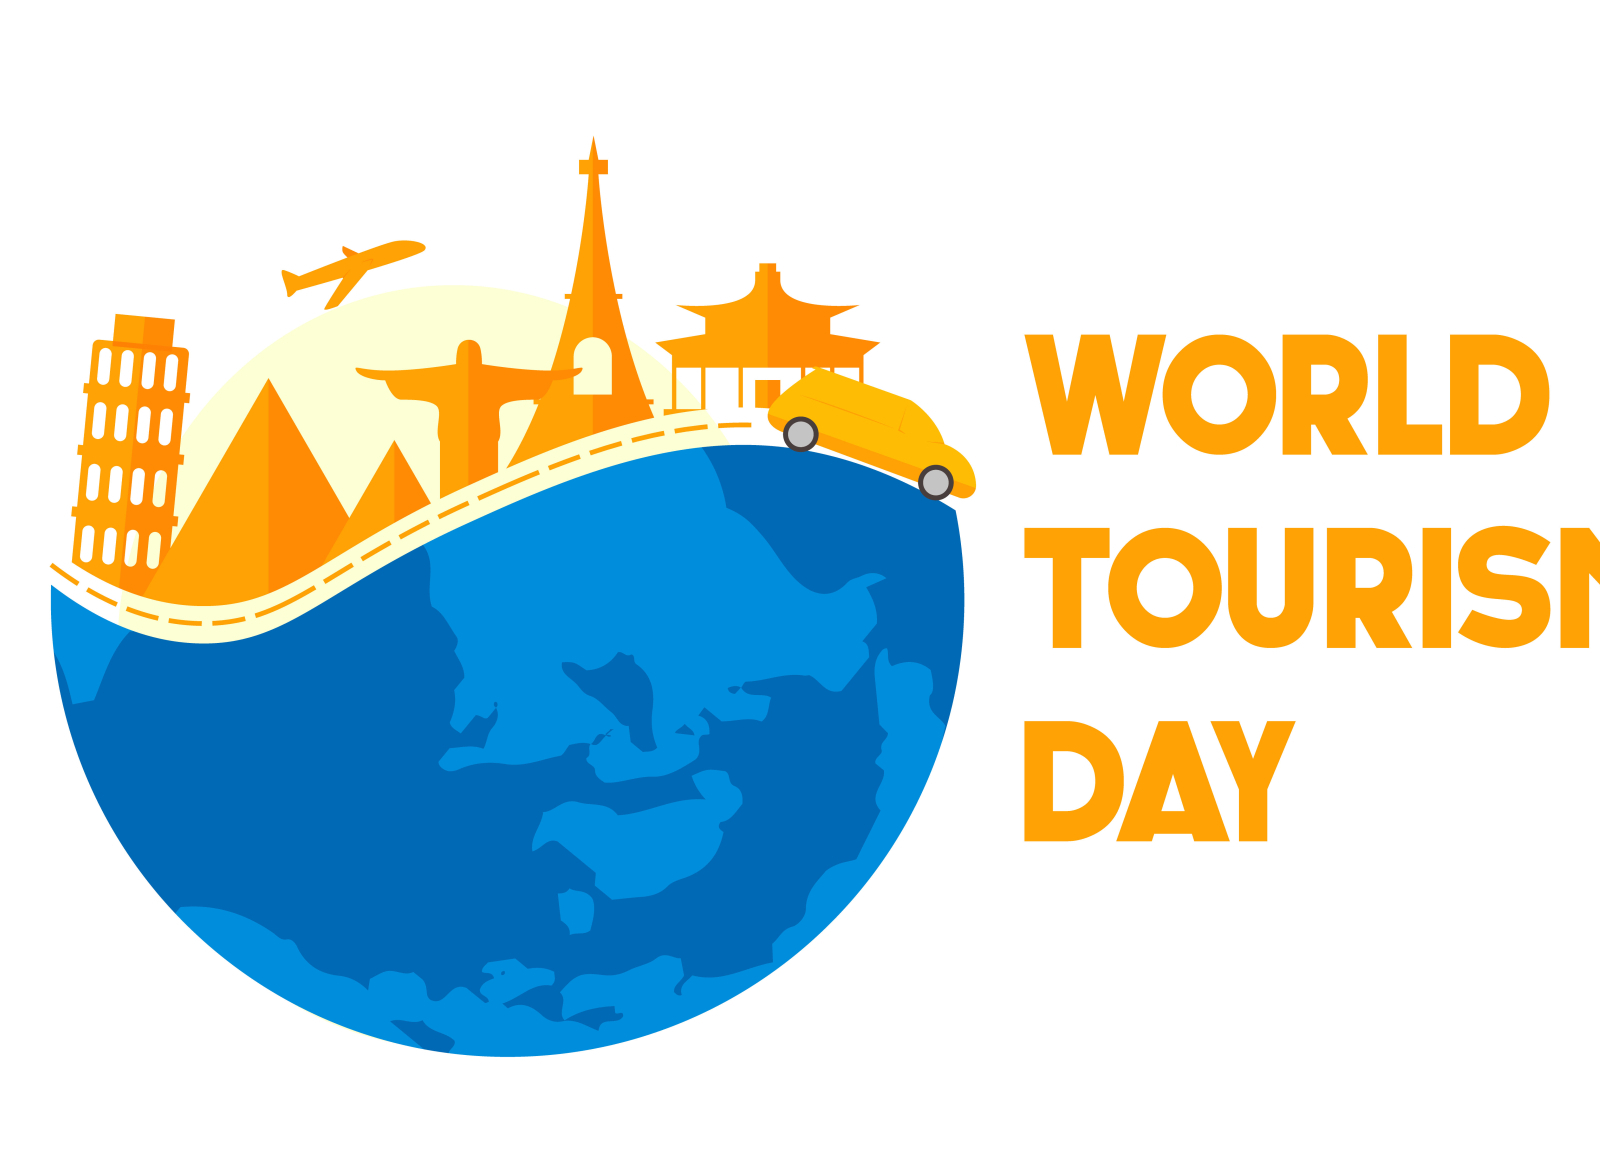 WORLD TOURISM DAY DESIGN by Syugiart on Dribbble